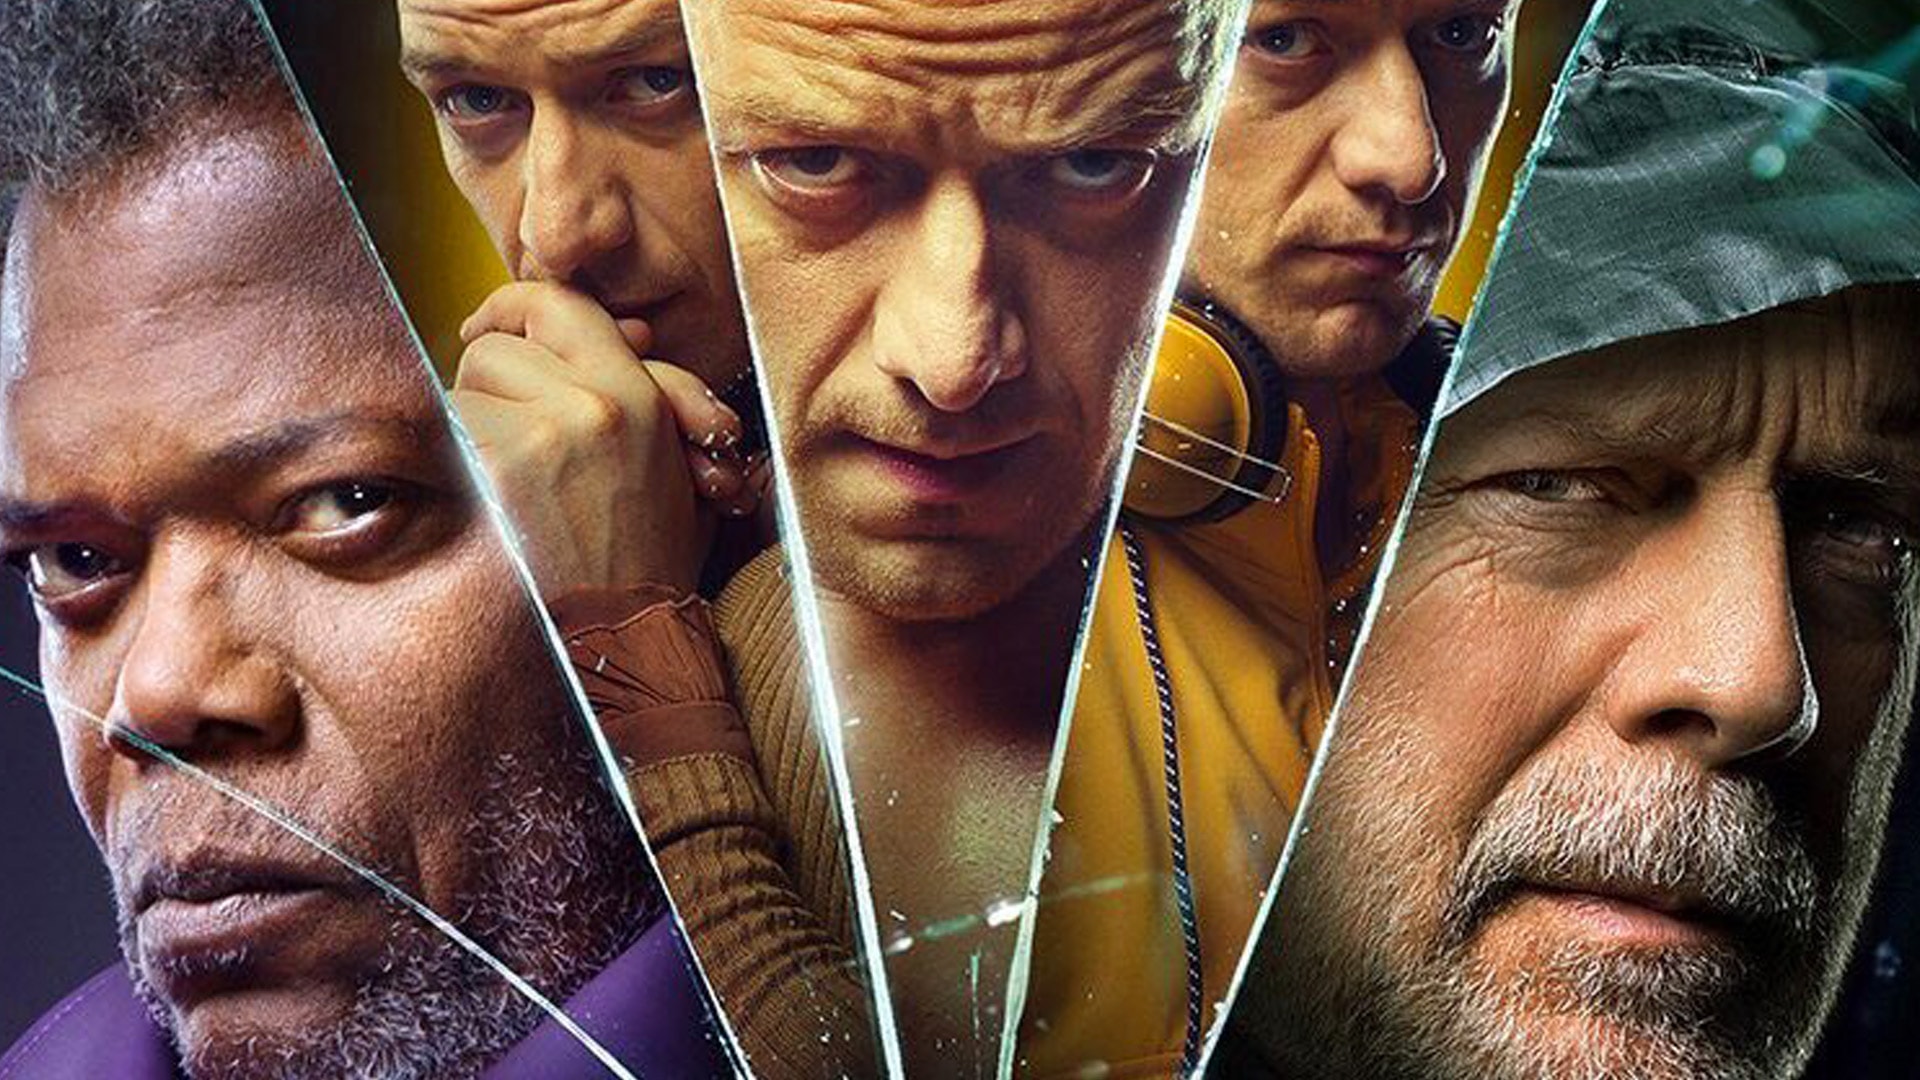 Movie of the Week: Buy “Glass” by M. Night Shyamalan for $ 9.90!